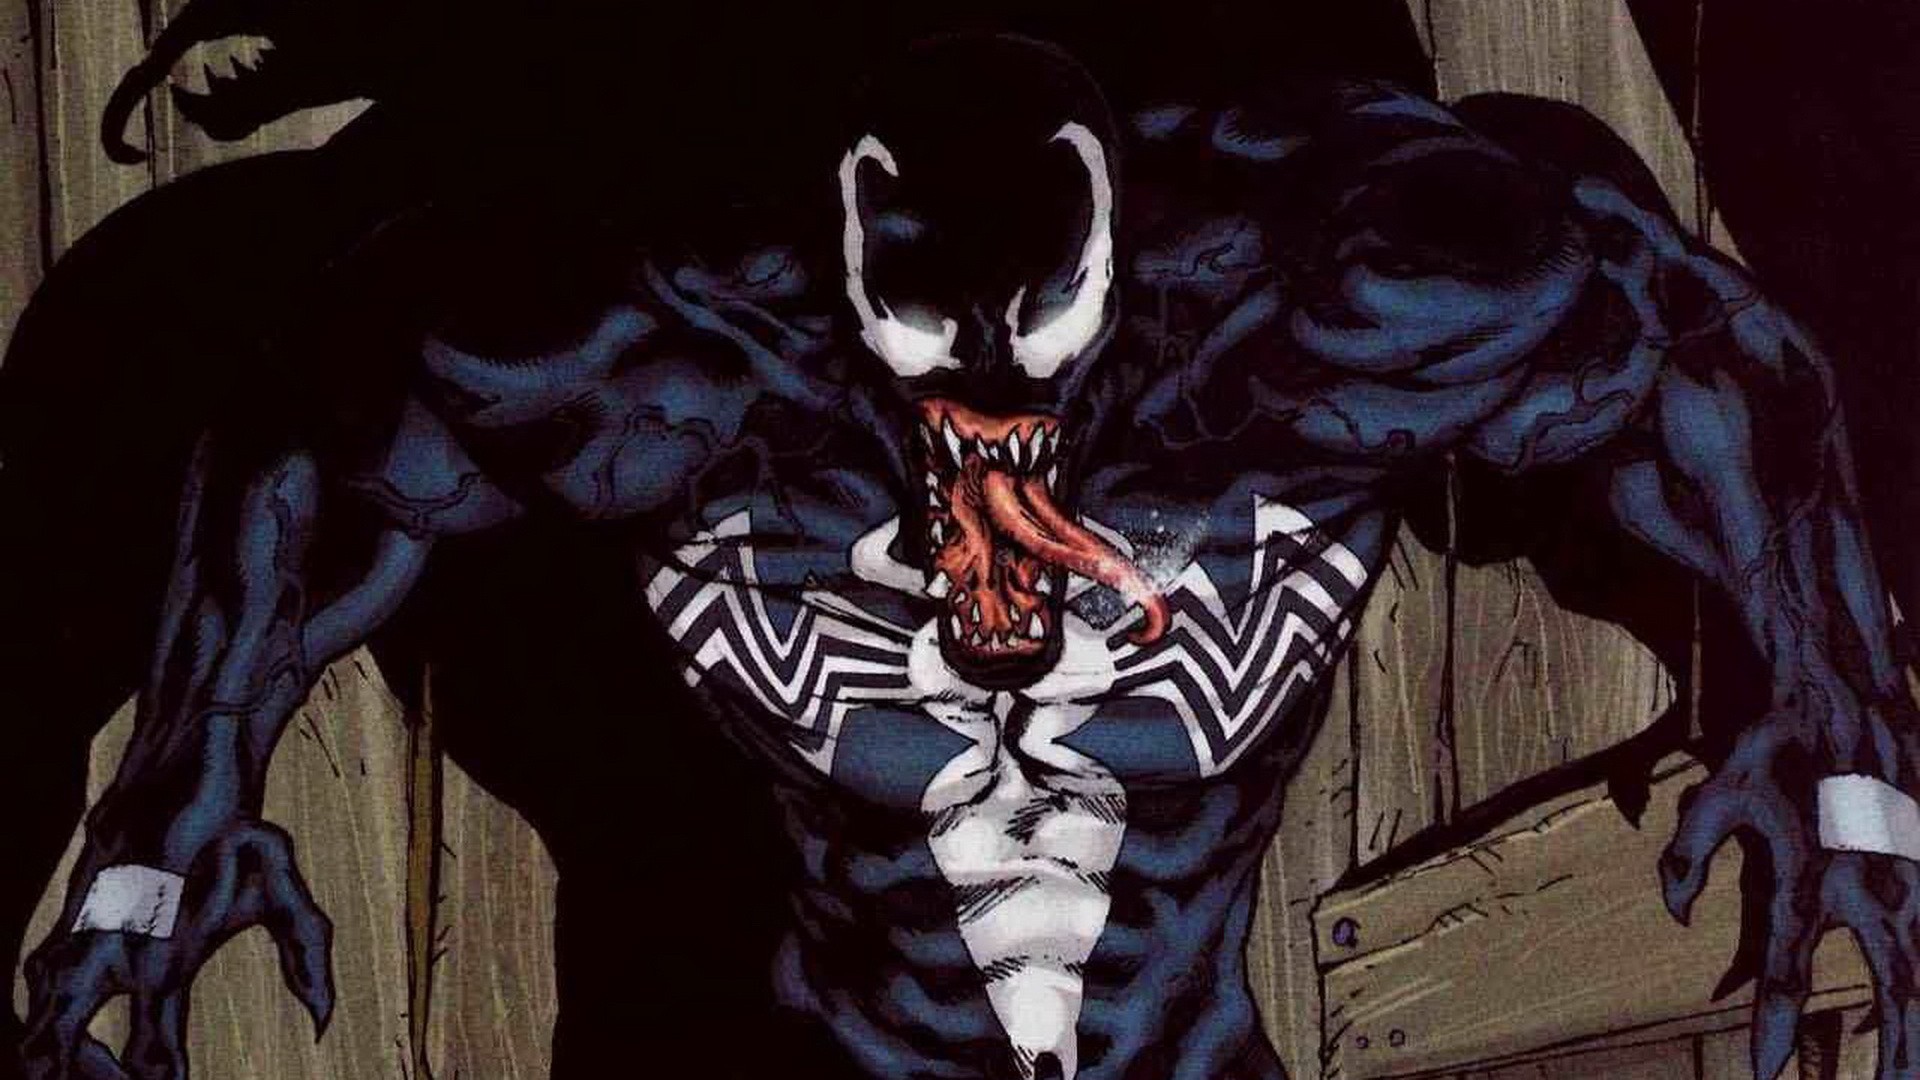 Filming for Venom May Start Later Than Planned